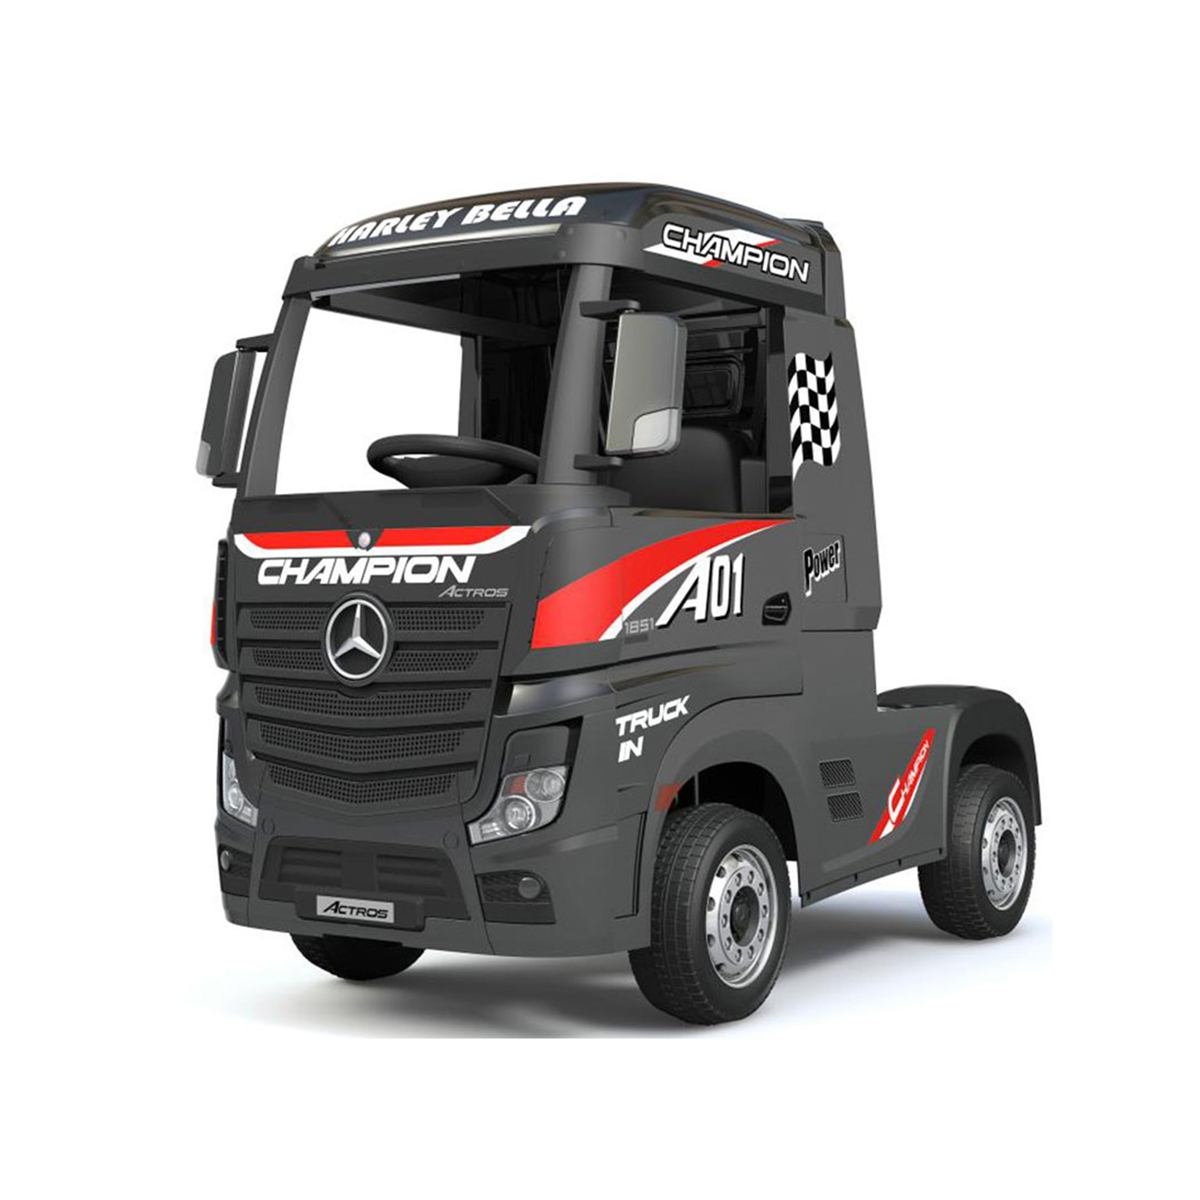 Benz Actros LX-358 Kids Ride On Electric Toy Car Assorted Color